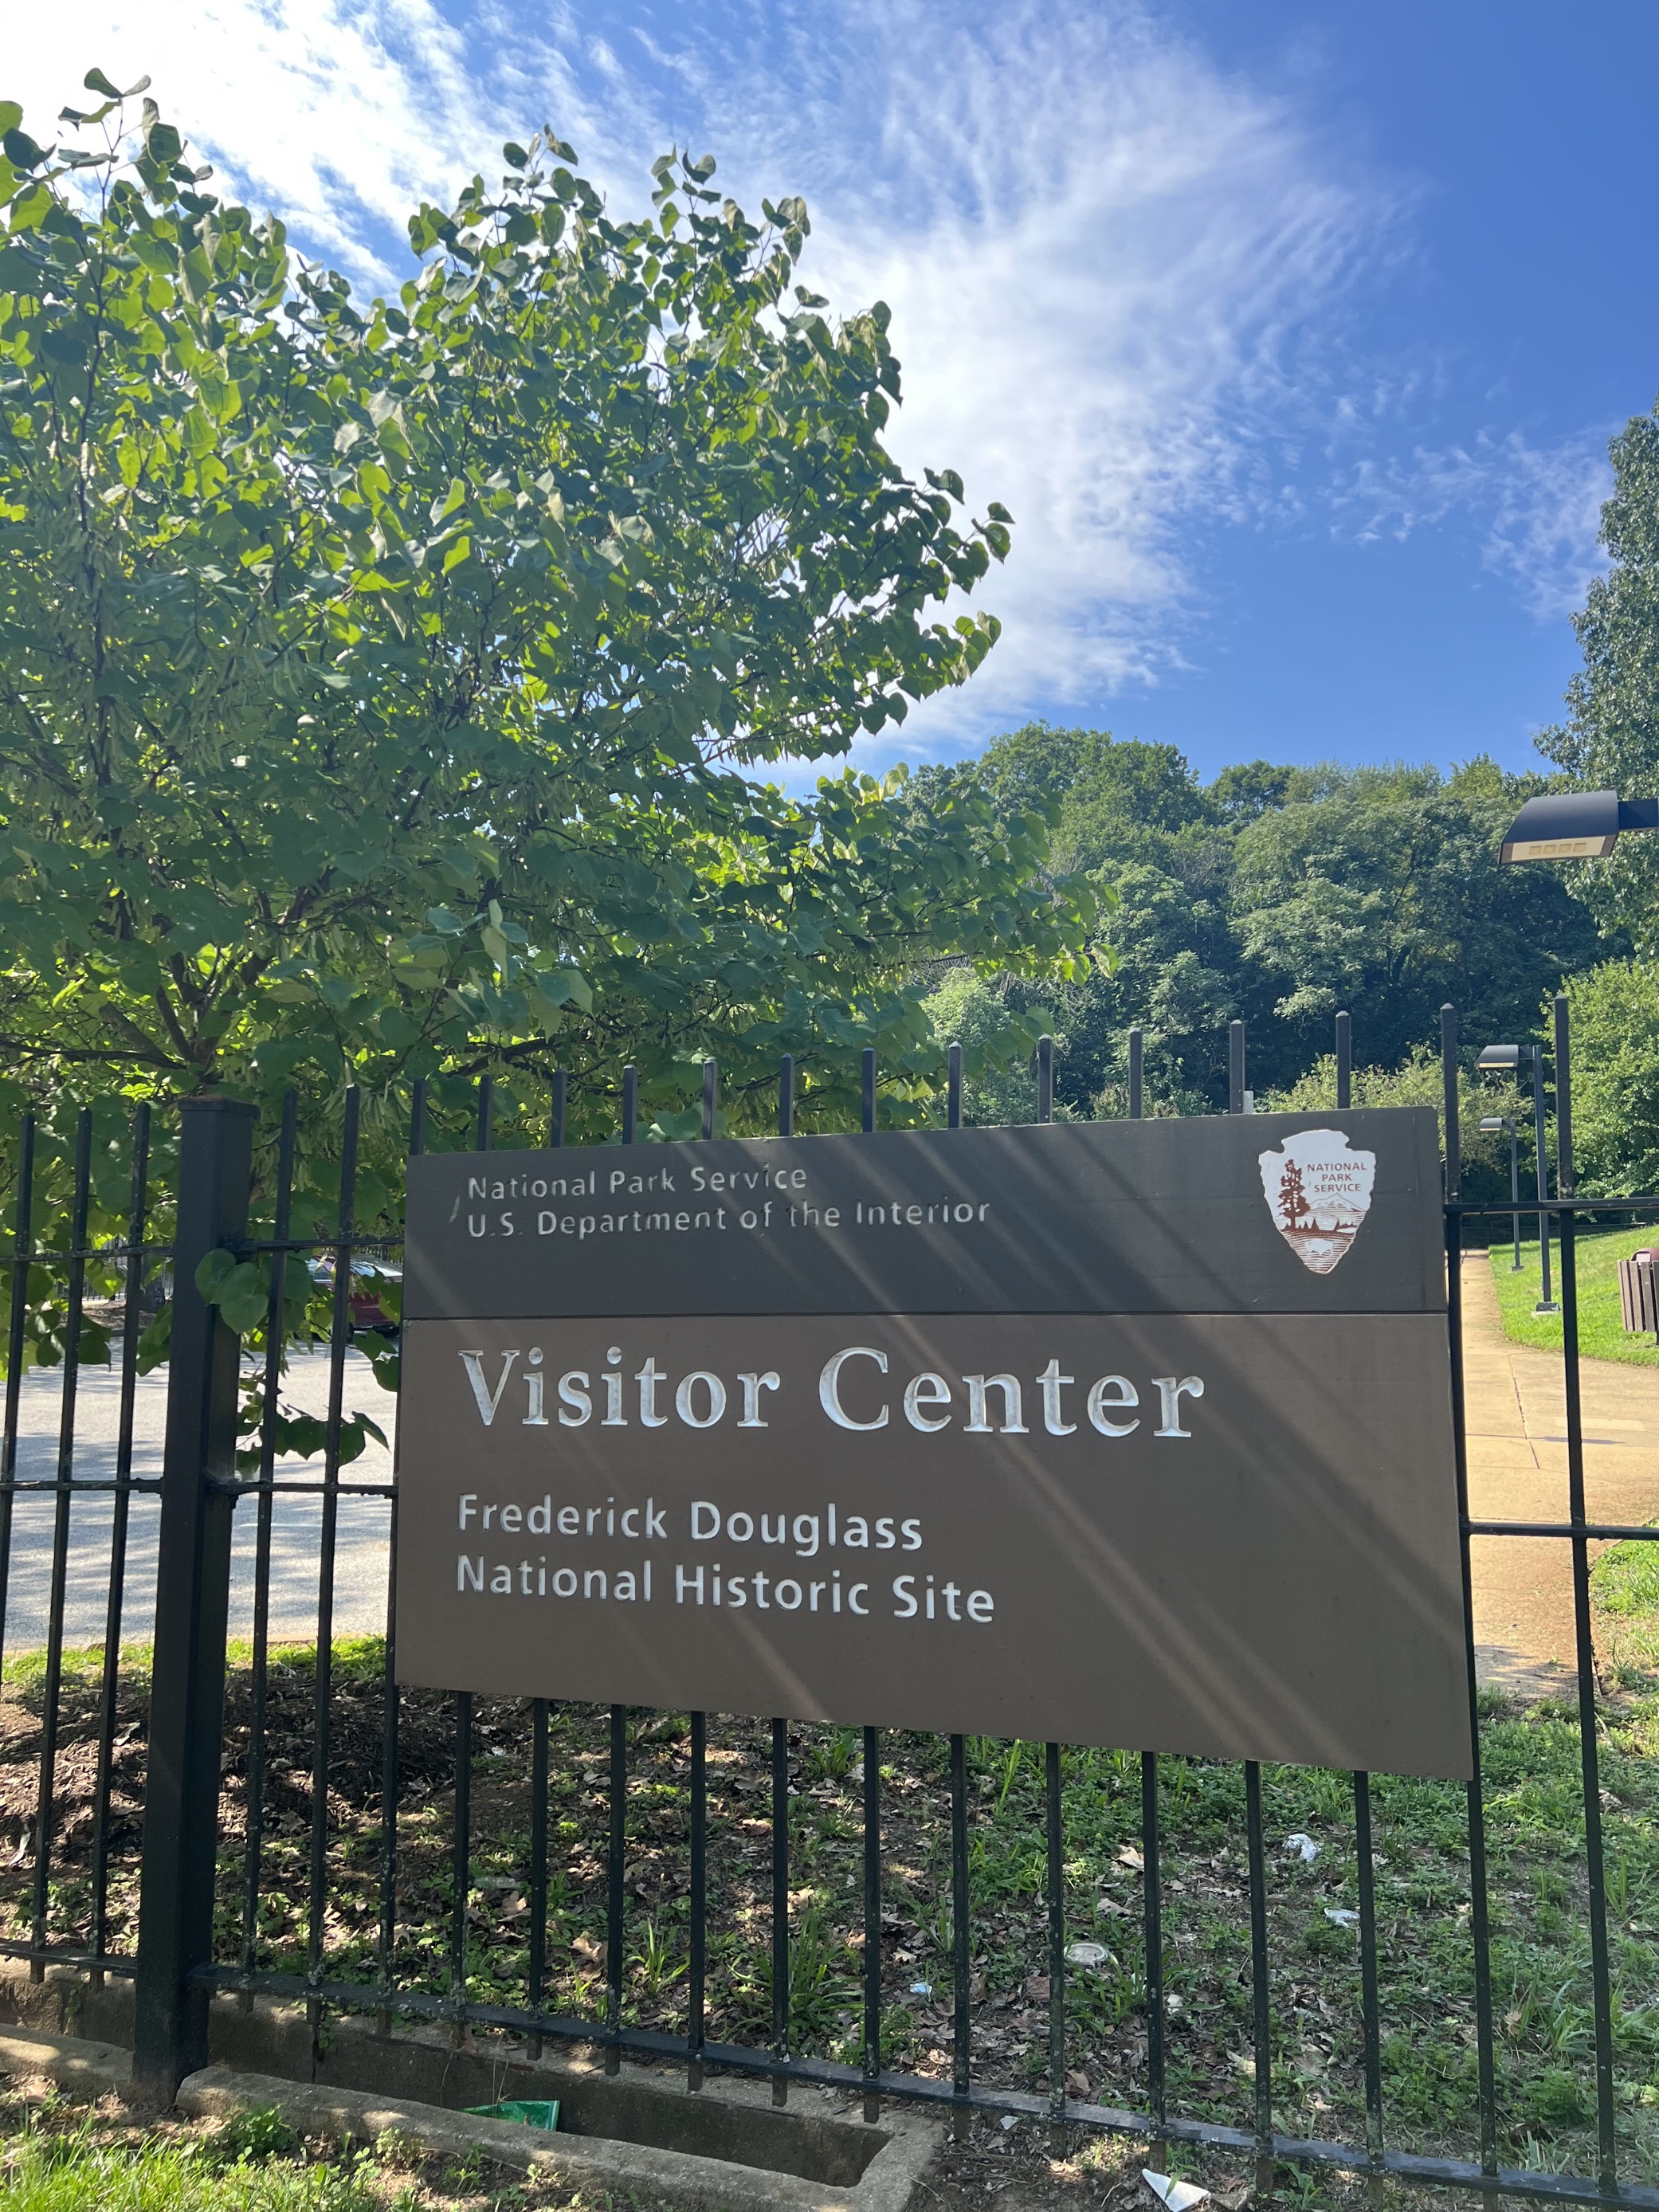 Visitor Center sign at Frederick Douglass National Historic Site